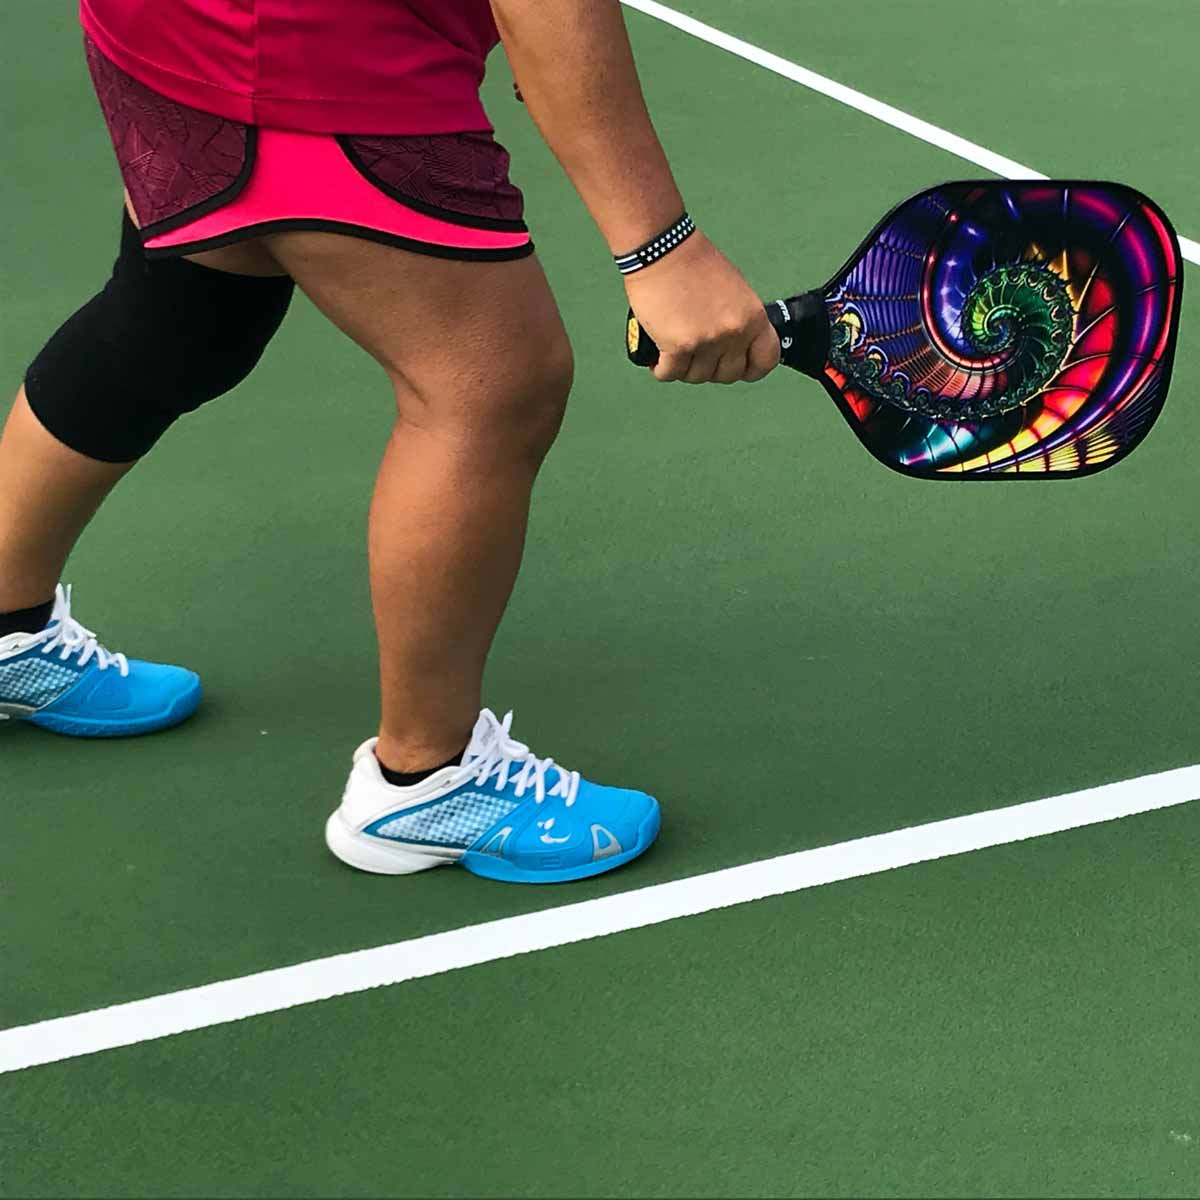 10 shoes for pickleball reviewed: Which are best?